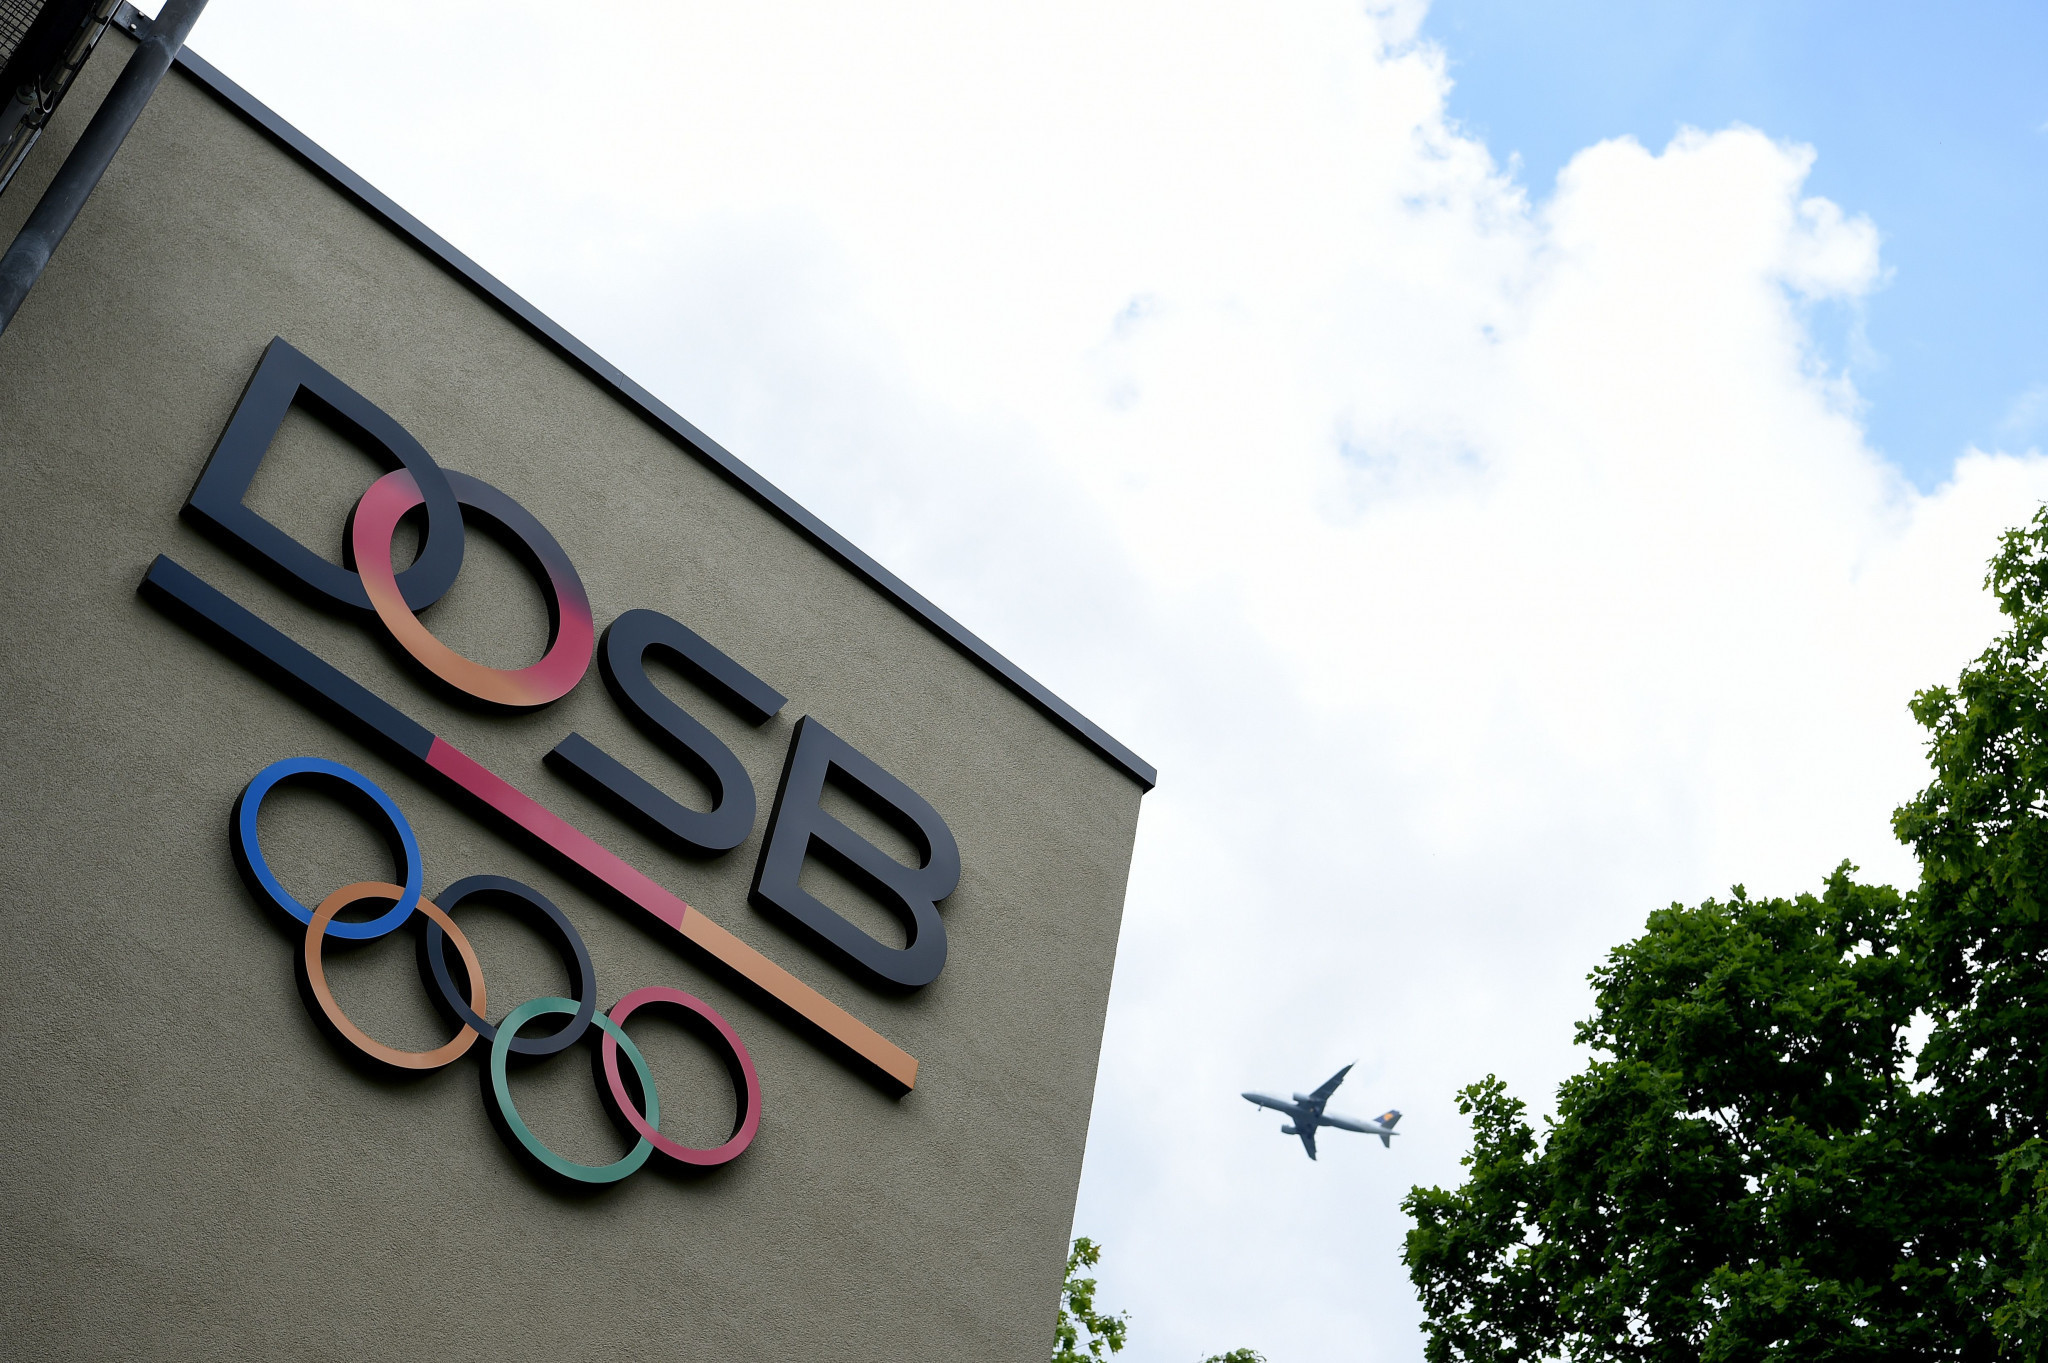 The DOSB is set to hold a vote to decide on if it should apply to bid for the Olympic and Paralympic Games ©Getty Images